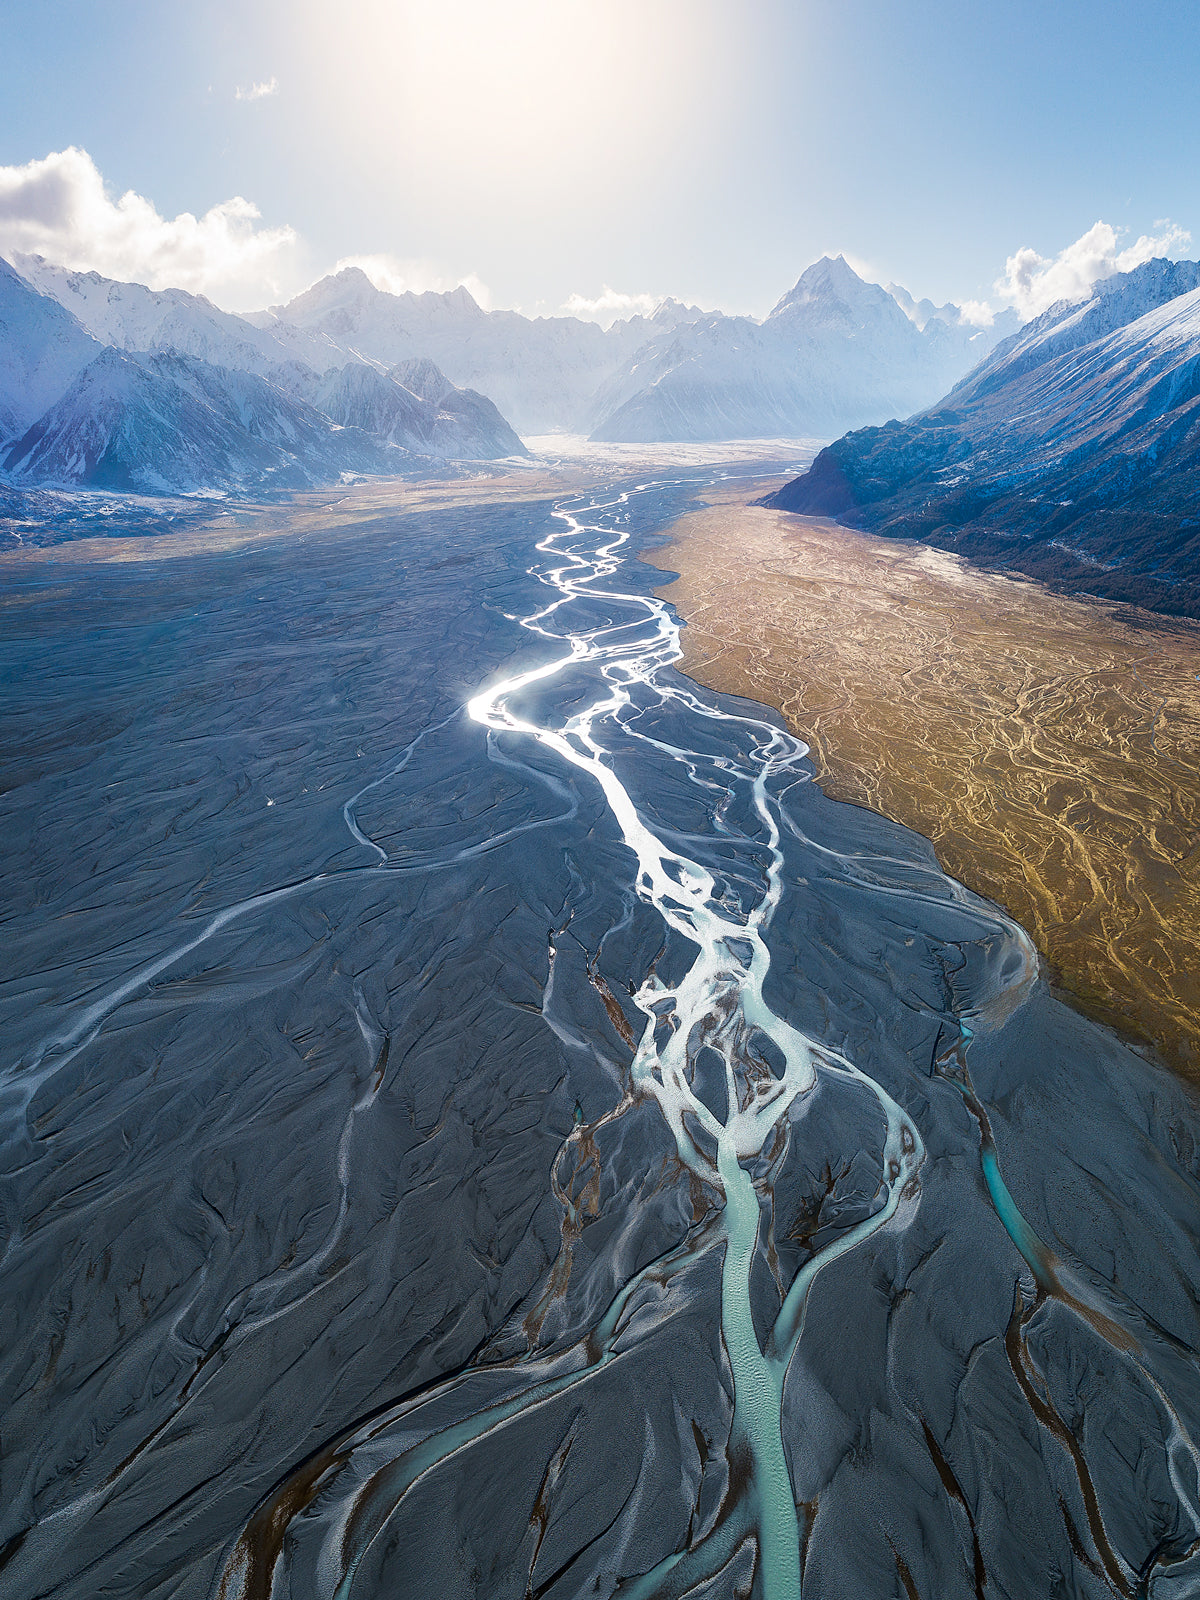 River Veins - Dave Wilcock Photography